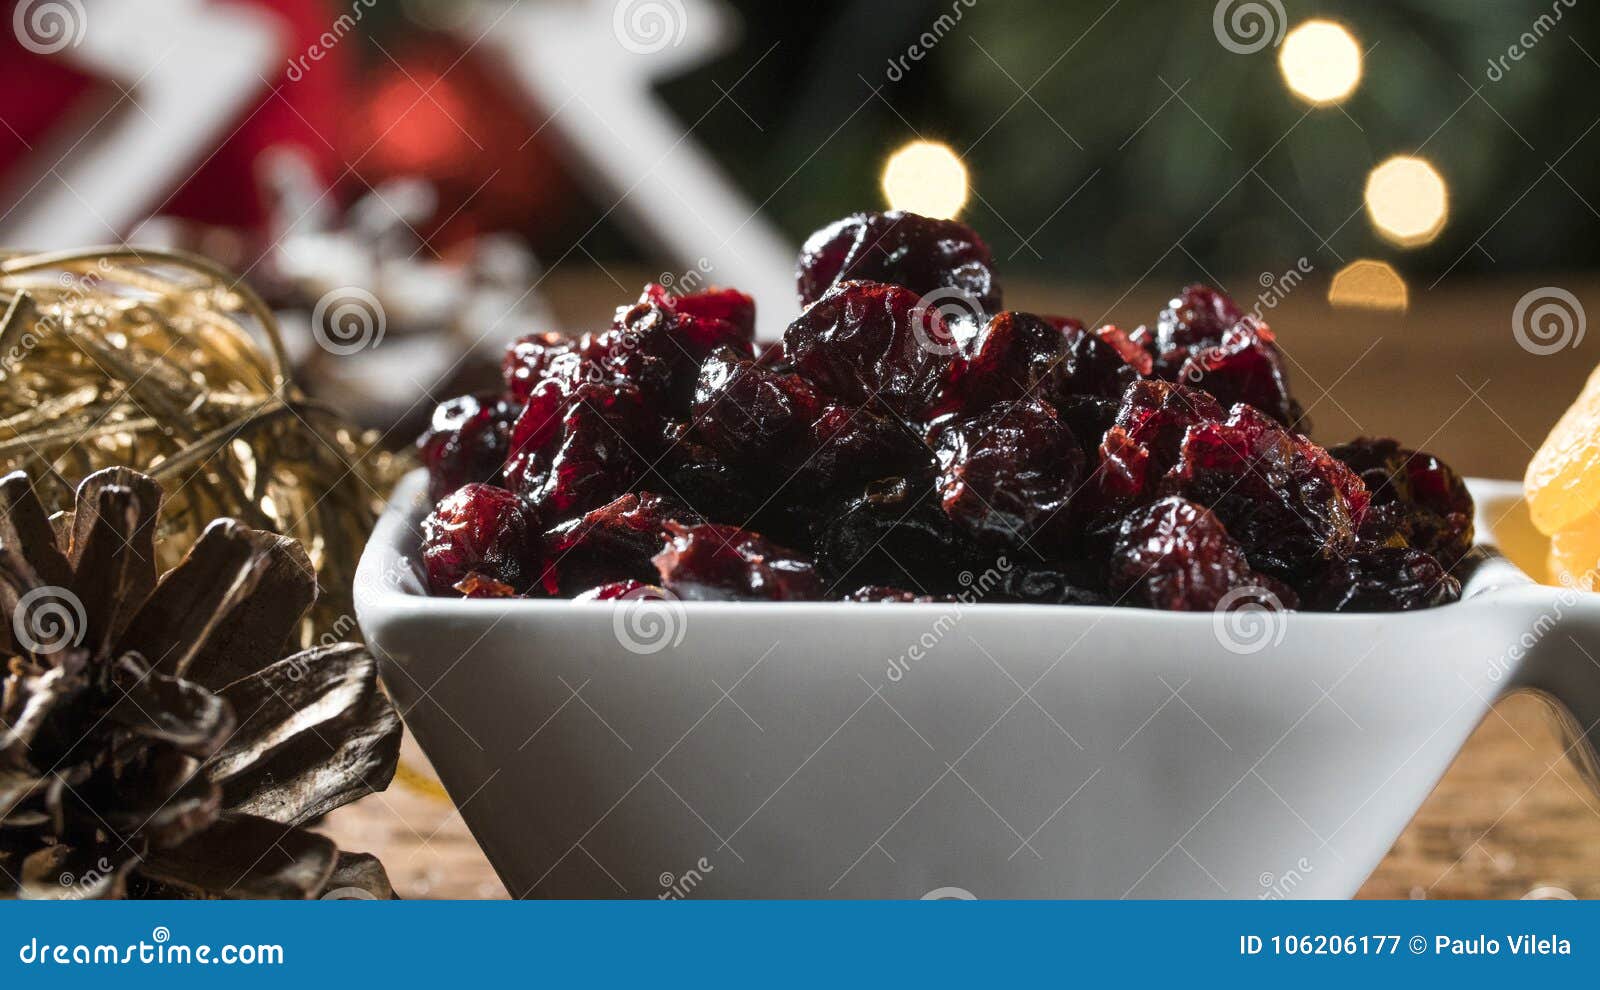 Dried apricots, pitted and dried berry in a bowl on the board with blurred christmas background.